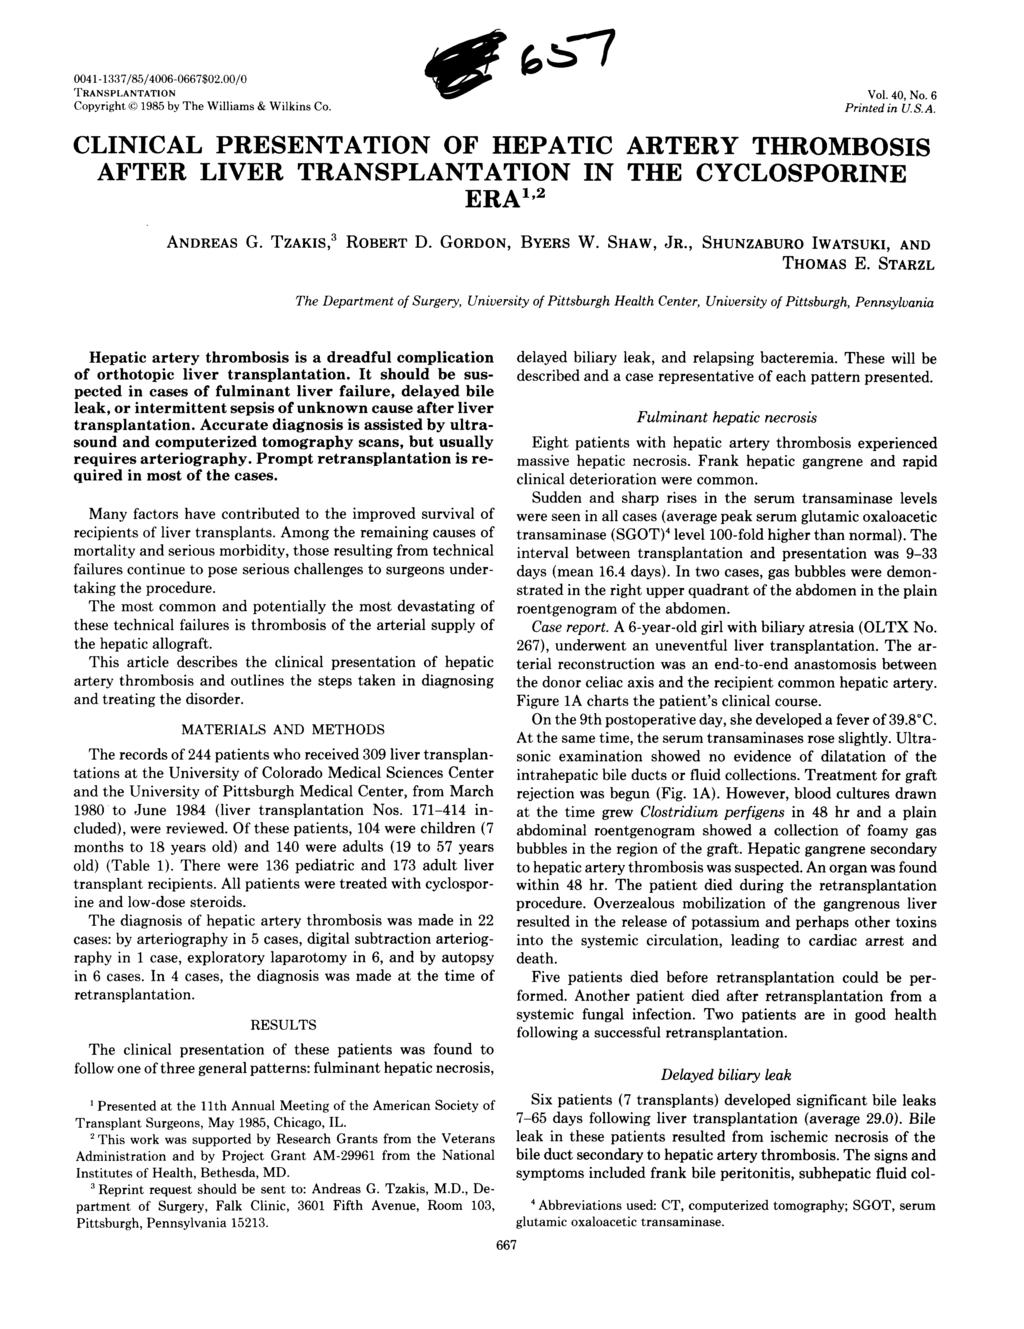 41 1337/85/46-667$2./ TRANSPLANTATION Copyright 1985 by The Williams & Wilkins Co. Vol. 4, No.6 Printed in U. S. A.